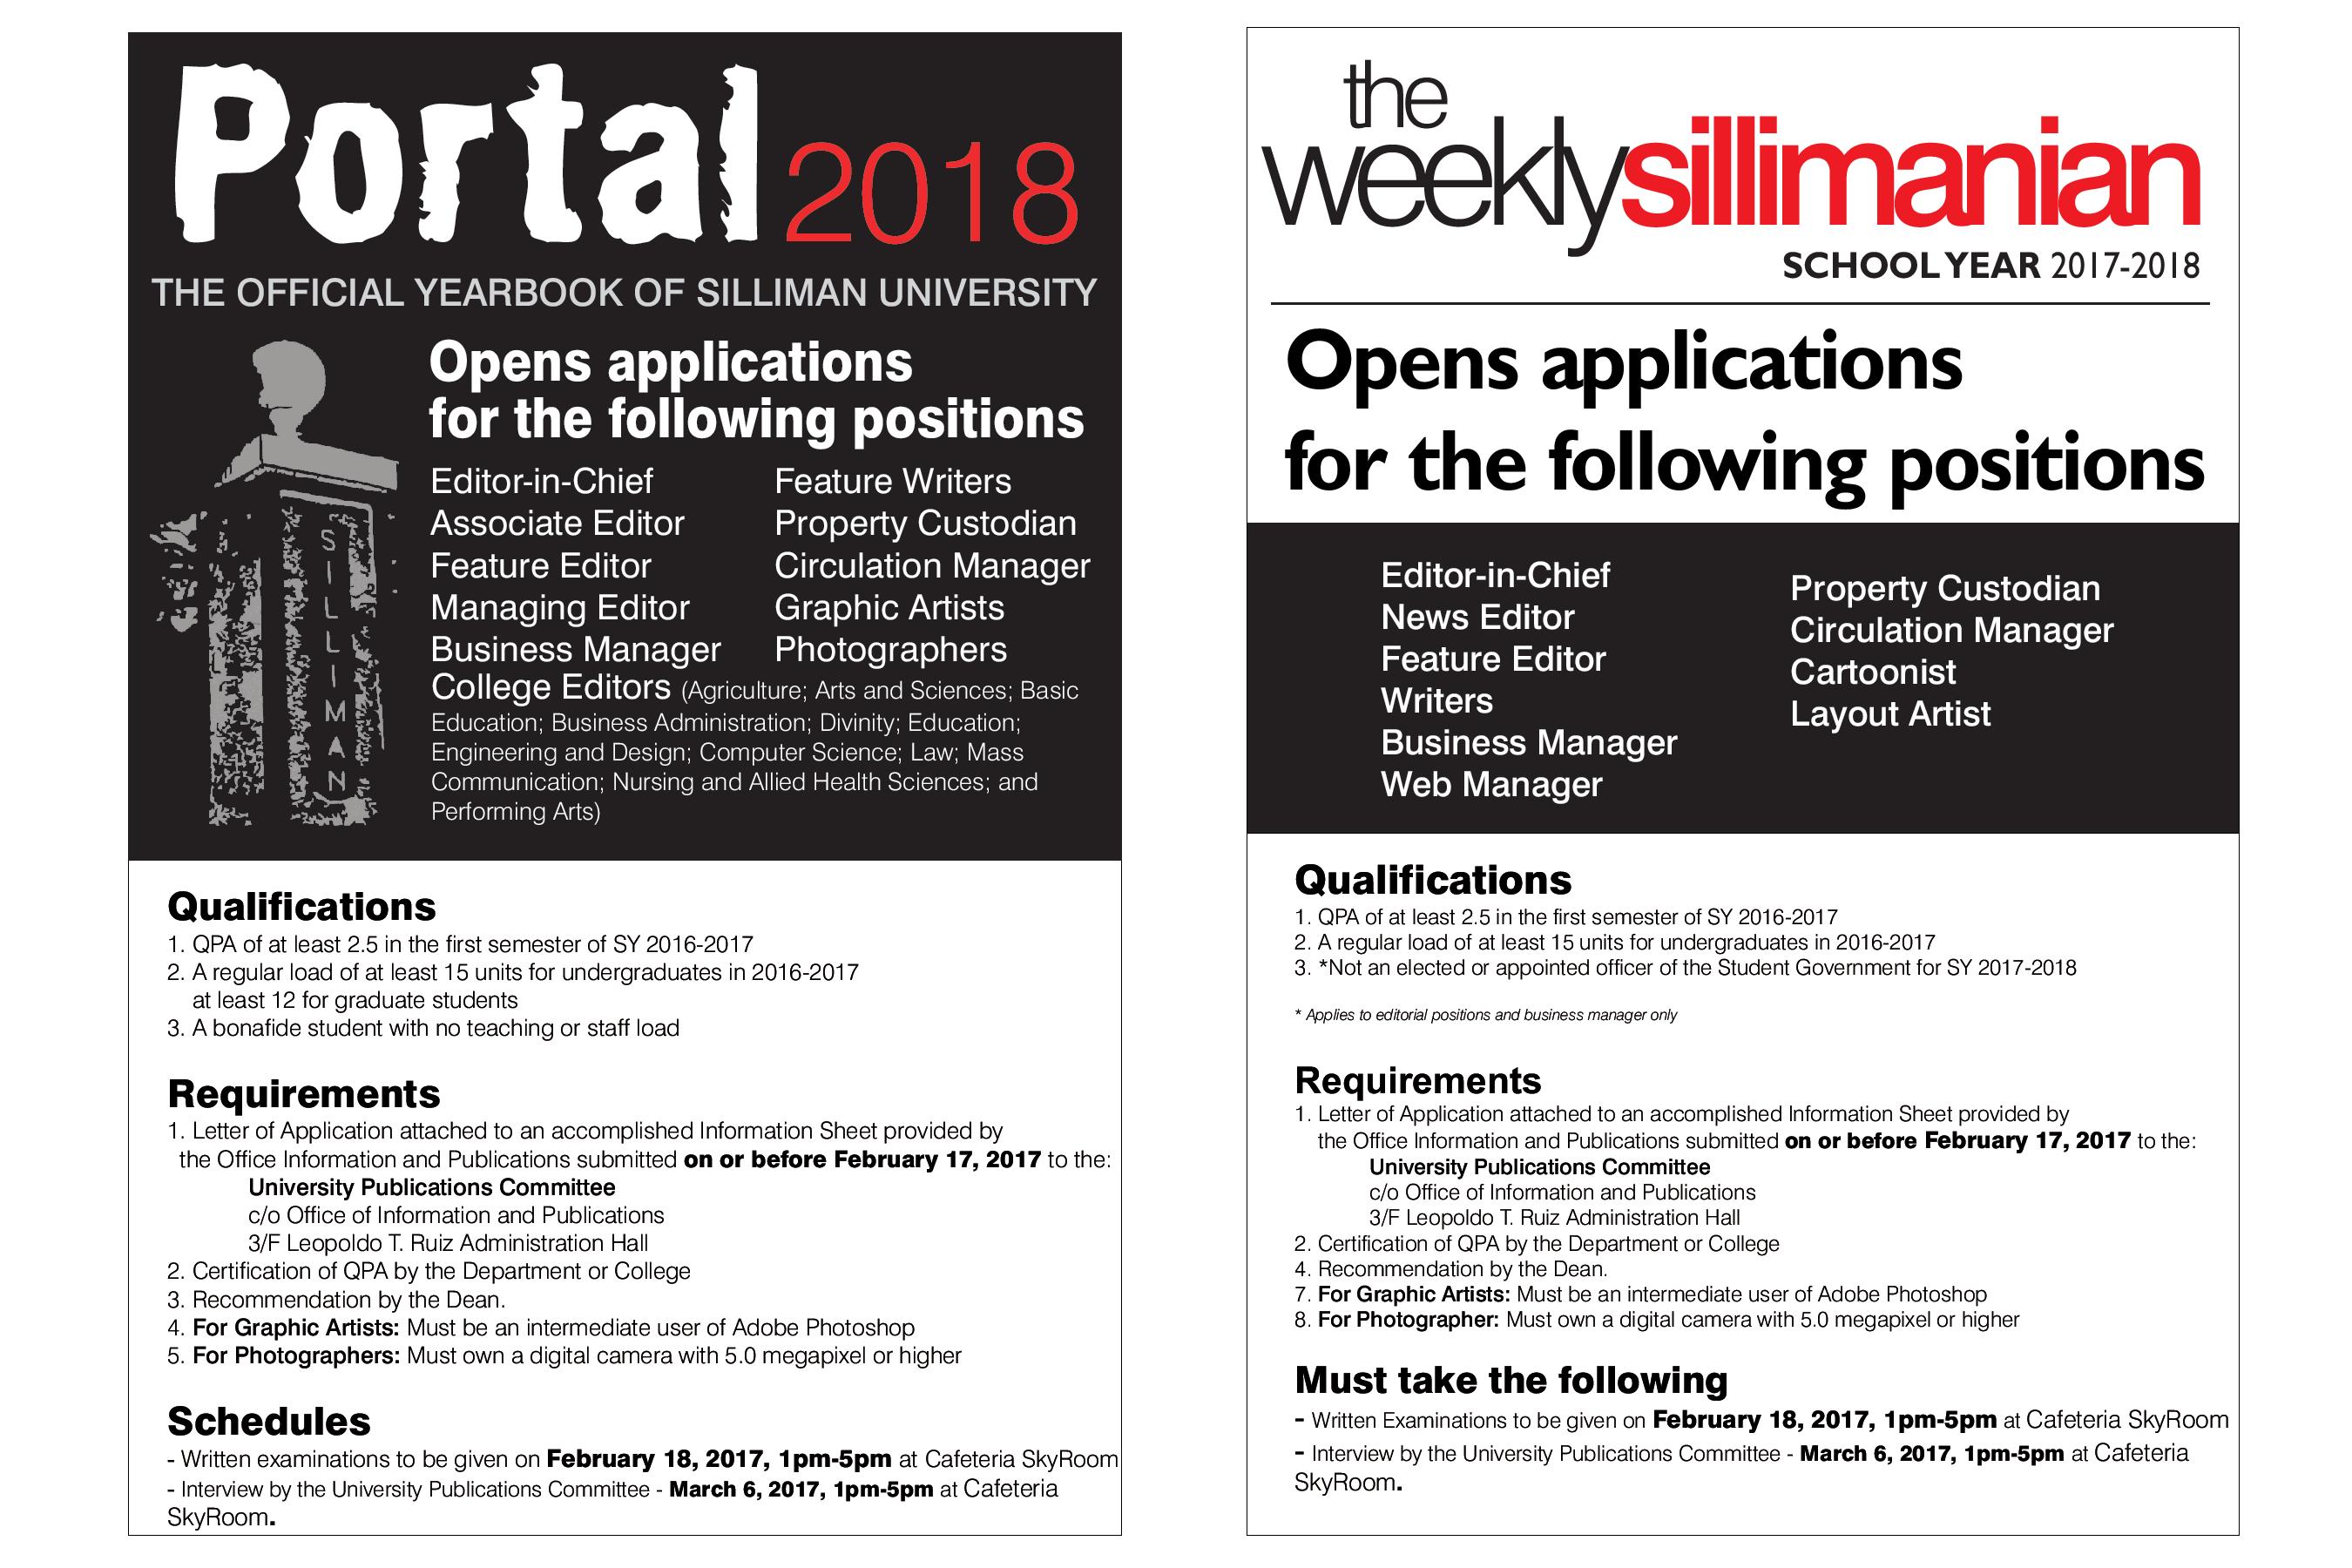 Application for Portal 2018 and The Weekly Sillimanian 2017-2018 Now Open